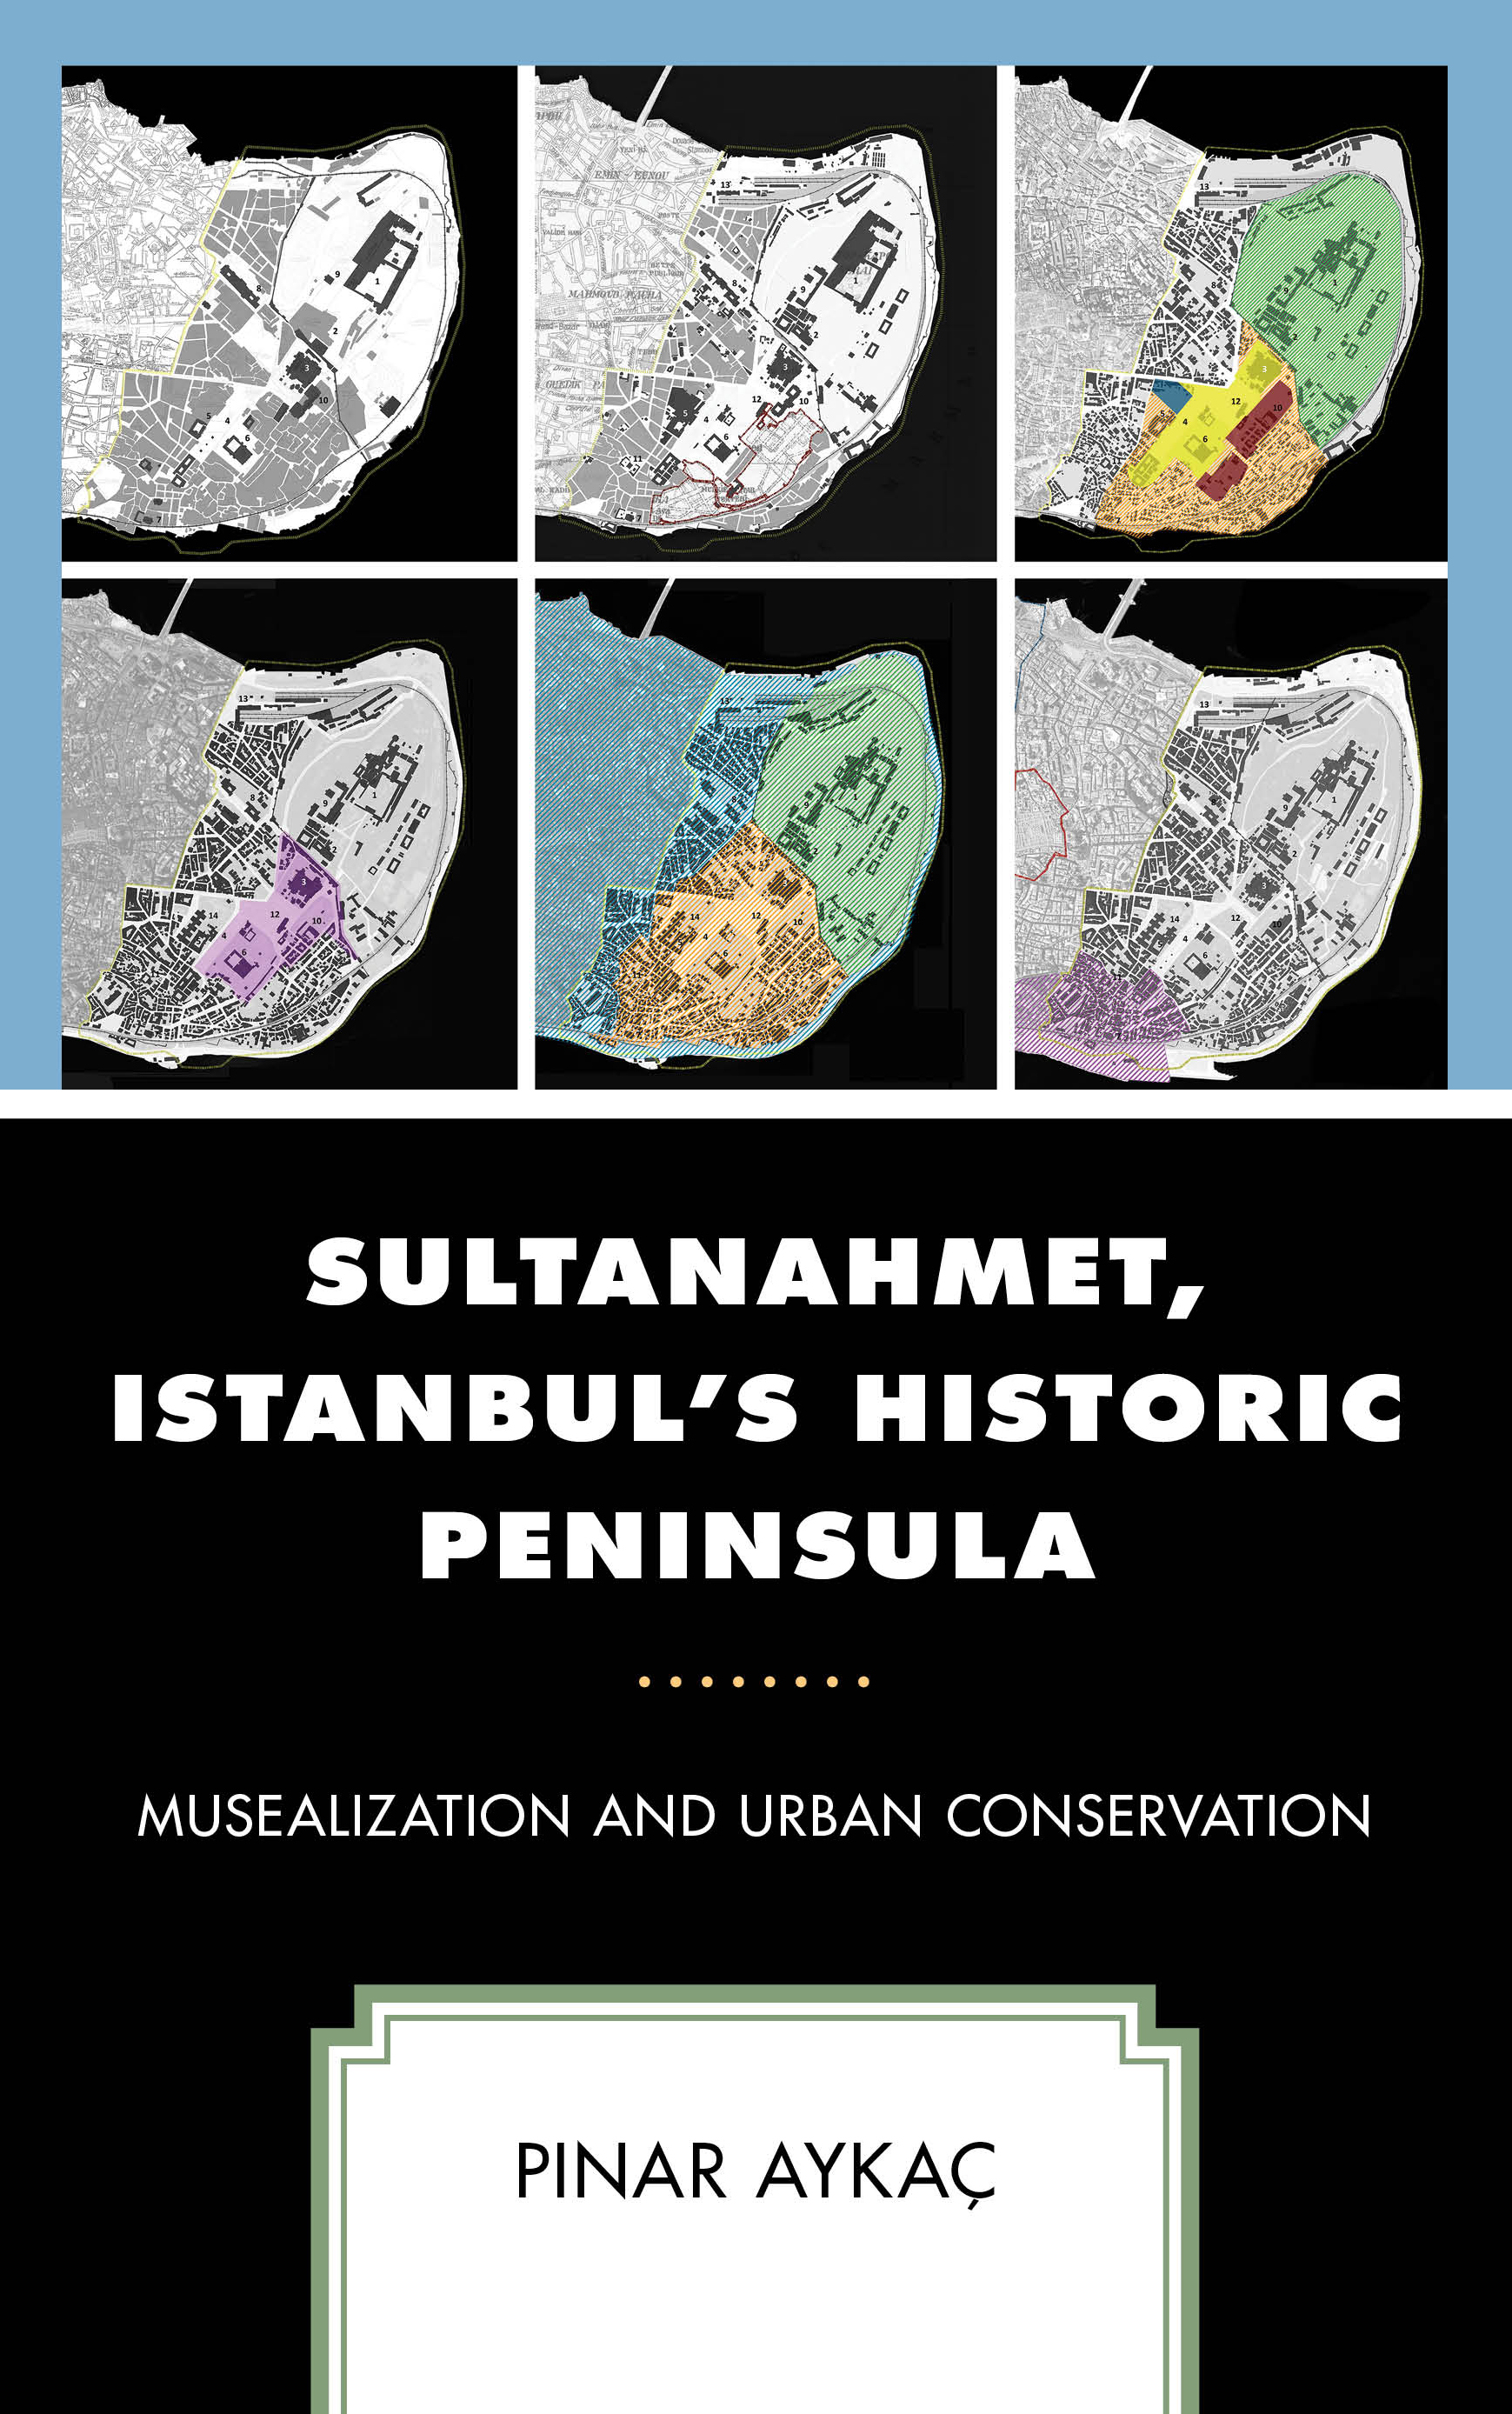 Sultanahmet, Istanbul’s Historic Peninsula: Musealization and Urban Conservation